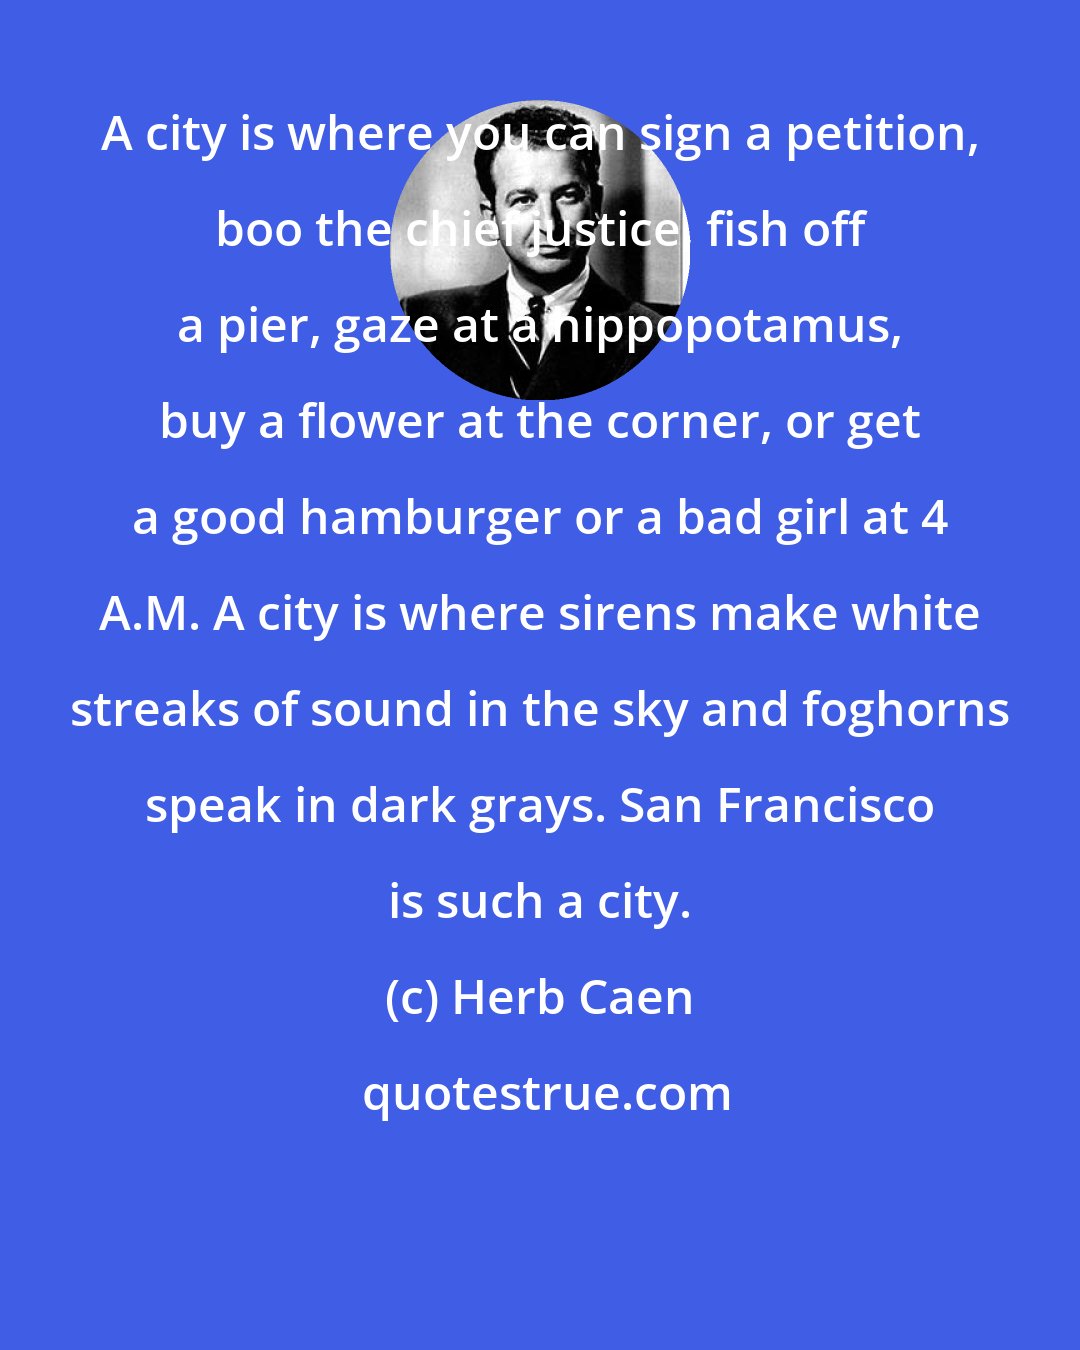 Herb Caen: A city is where you can sign a petition, boo the chief justice, fish off a pier, gaze at a hippopotamus, buy a flower at the corner, or get a good hamburger or a bad girl at 4 A.M. A city is where sirens make white streaks of sound in the sky and foghorns speak in dark grays. San Francisco is such a city.